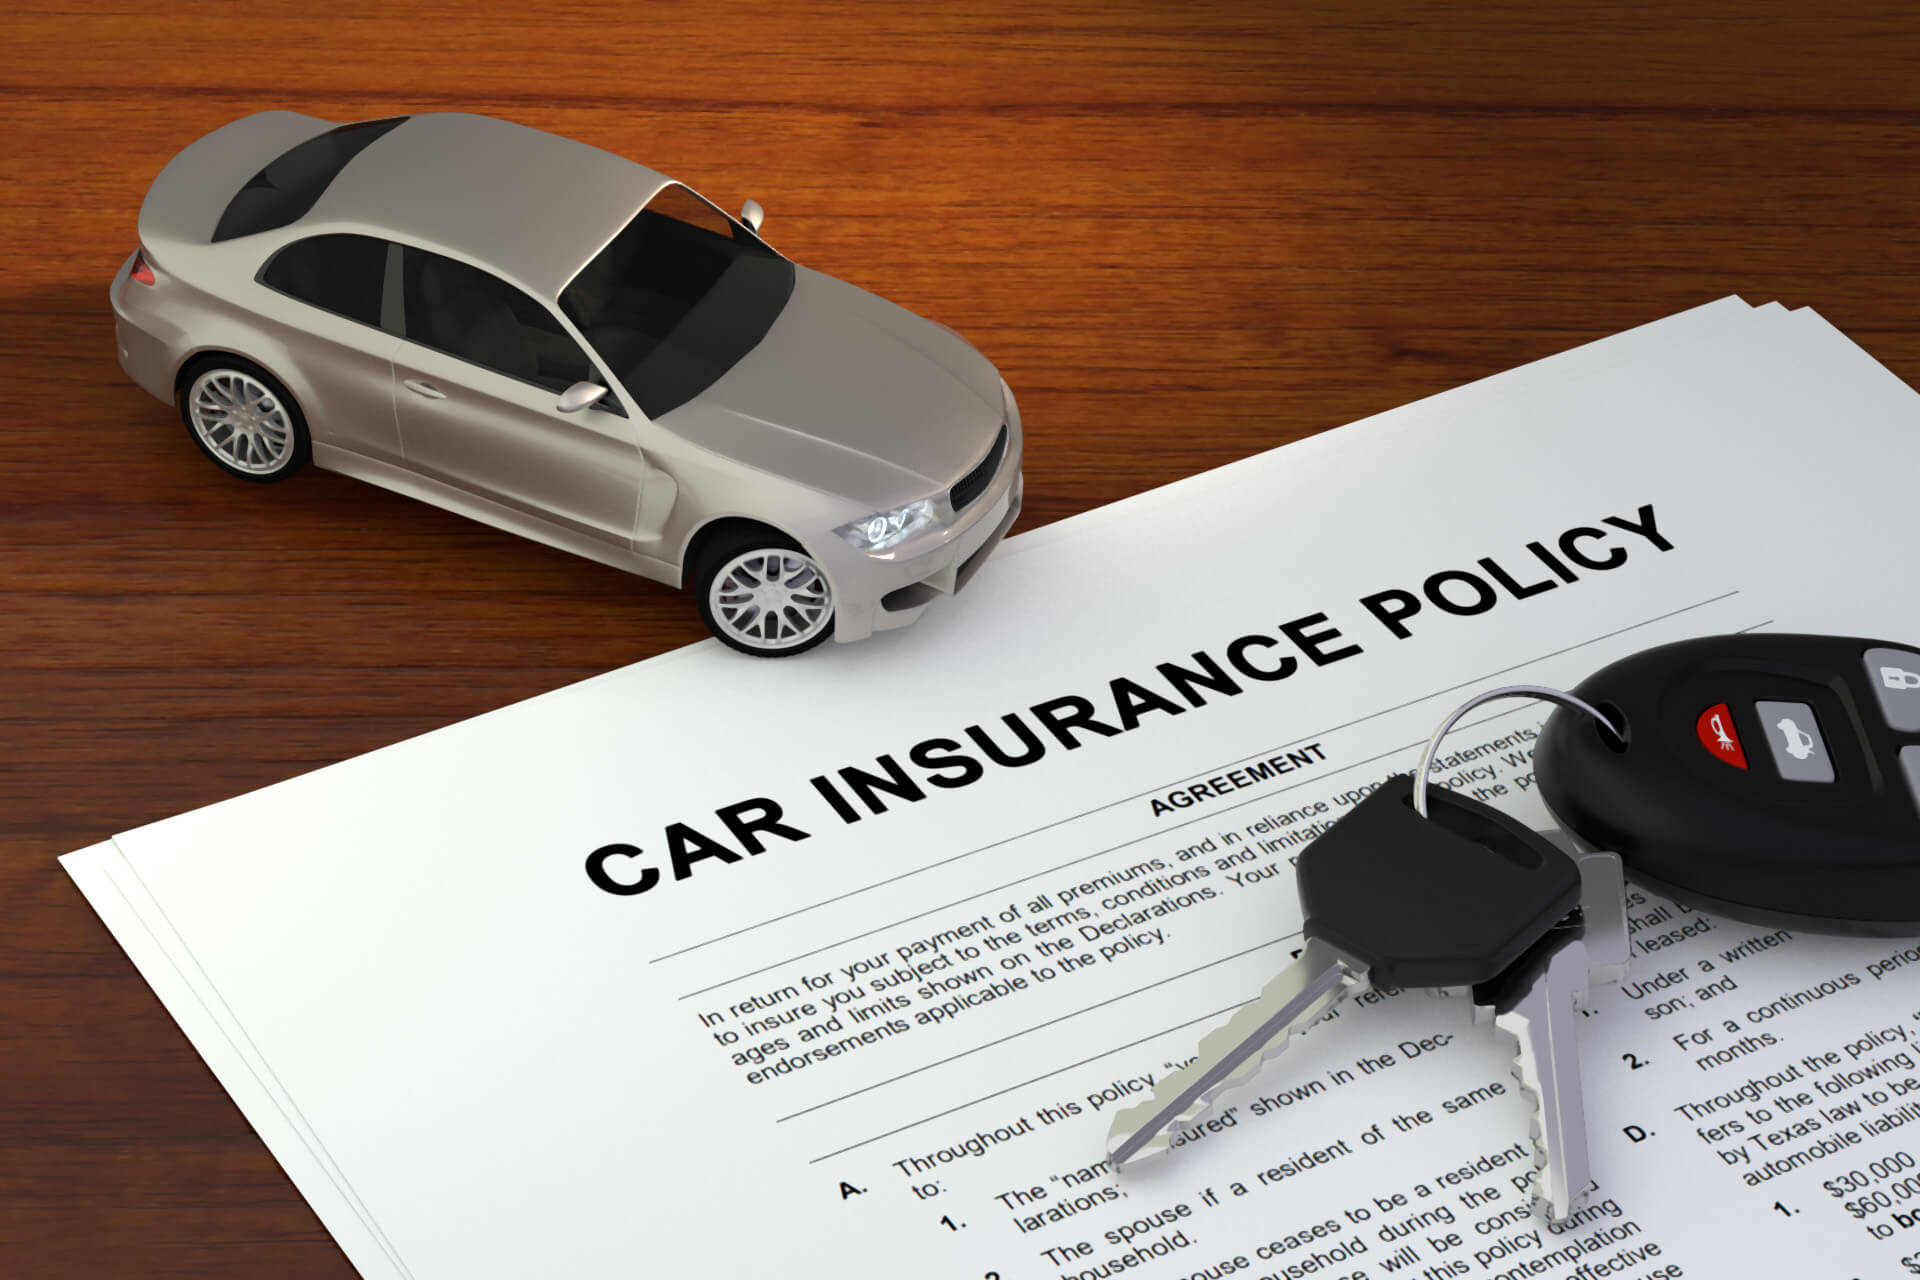 Car insurance policy on desk free image download